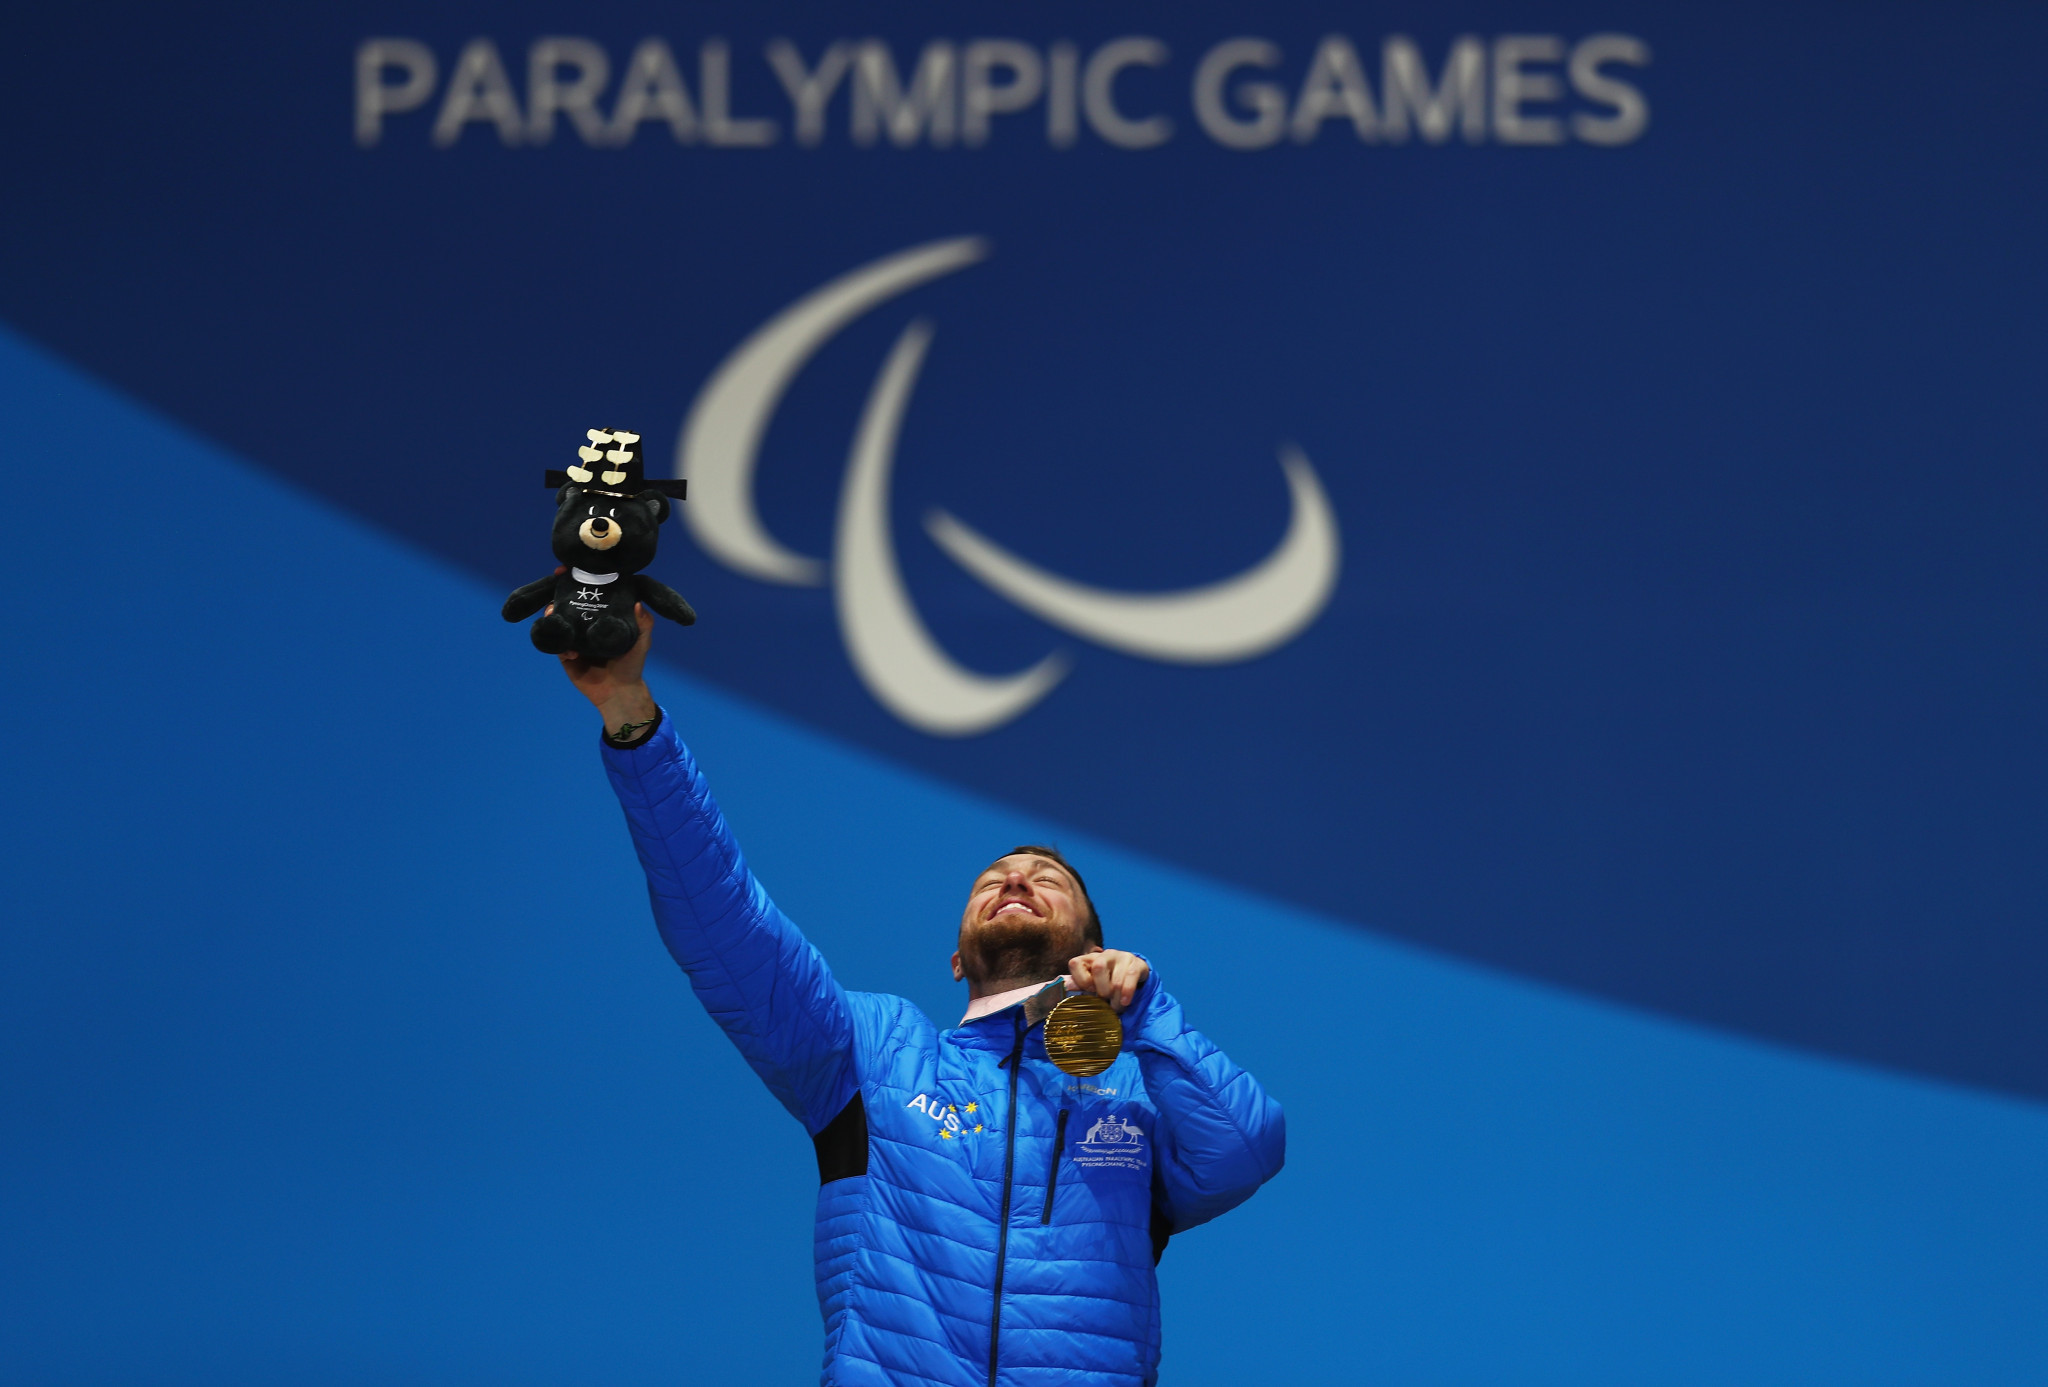 Simon Patmore won gold in the men's snowboard cross SB-UL at the 2018 Pyeongchang Winter Paralympics to make him the first Australian to get a medal at both the summer and winter editions ©Getty Images